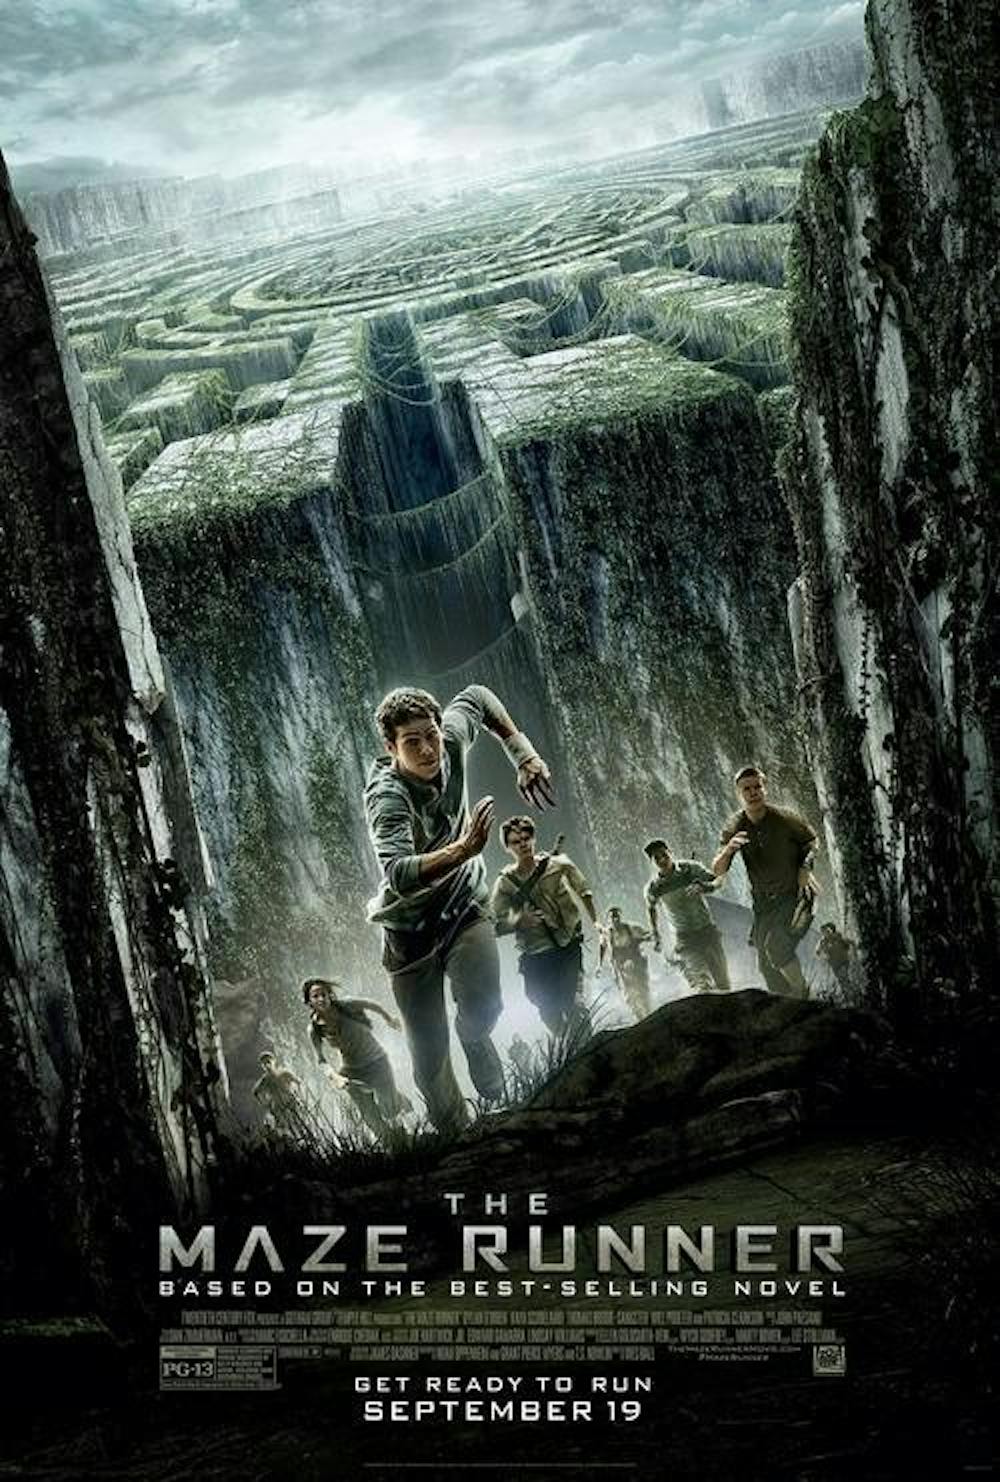 <p>“The Maze Runner” is more than just another installment in the mediocre young adult dystopian franchise</p>